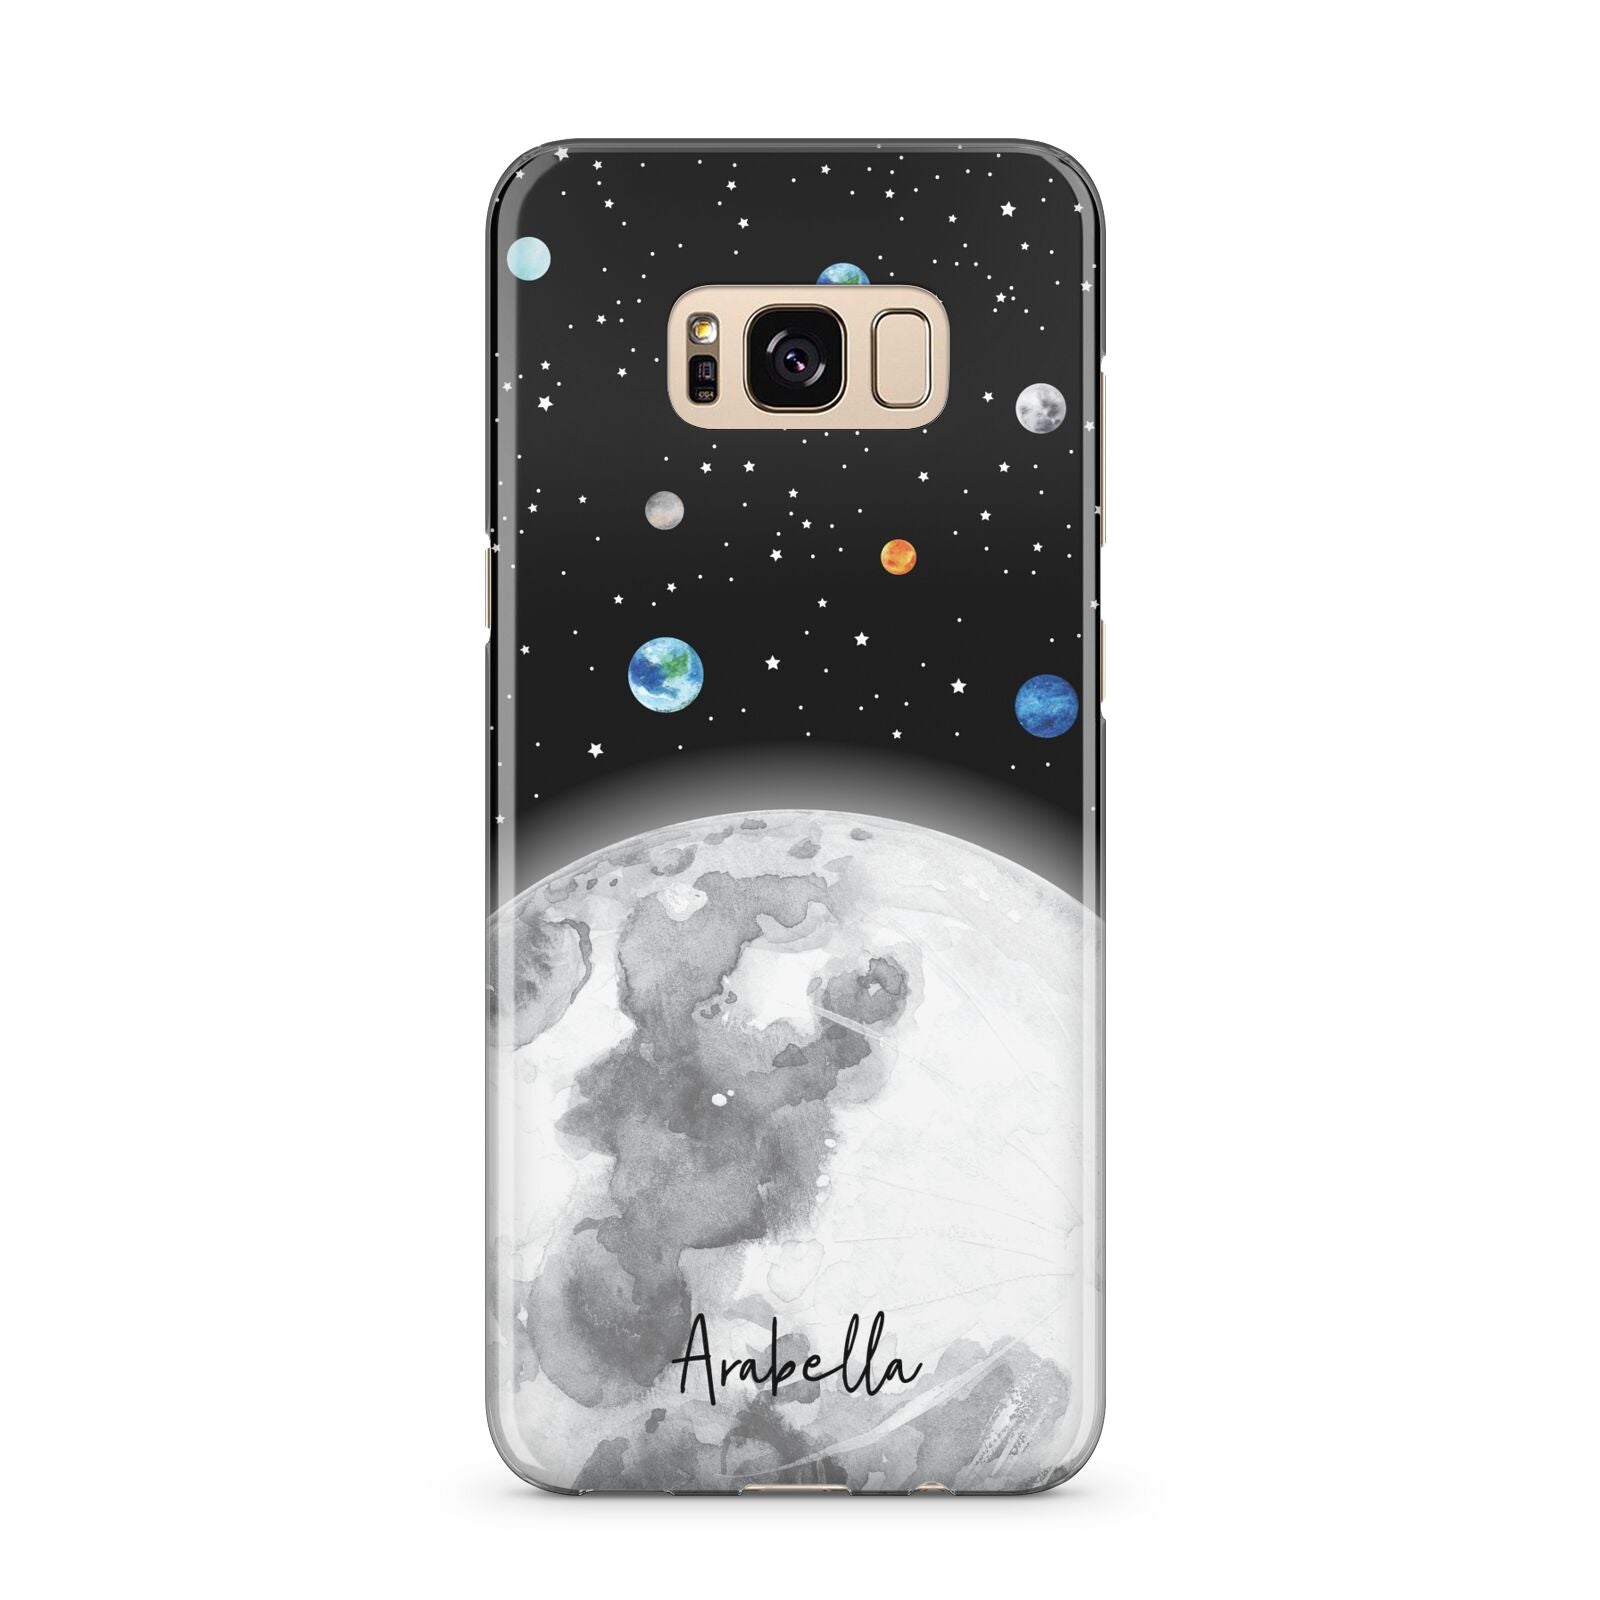 Watercolour Close up Moon with Name Samsung Galaxy S8 Plus Case